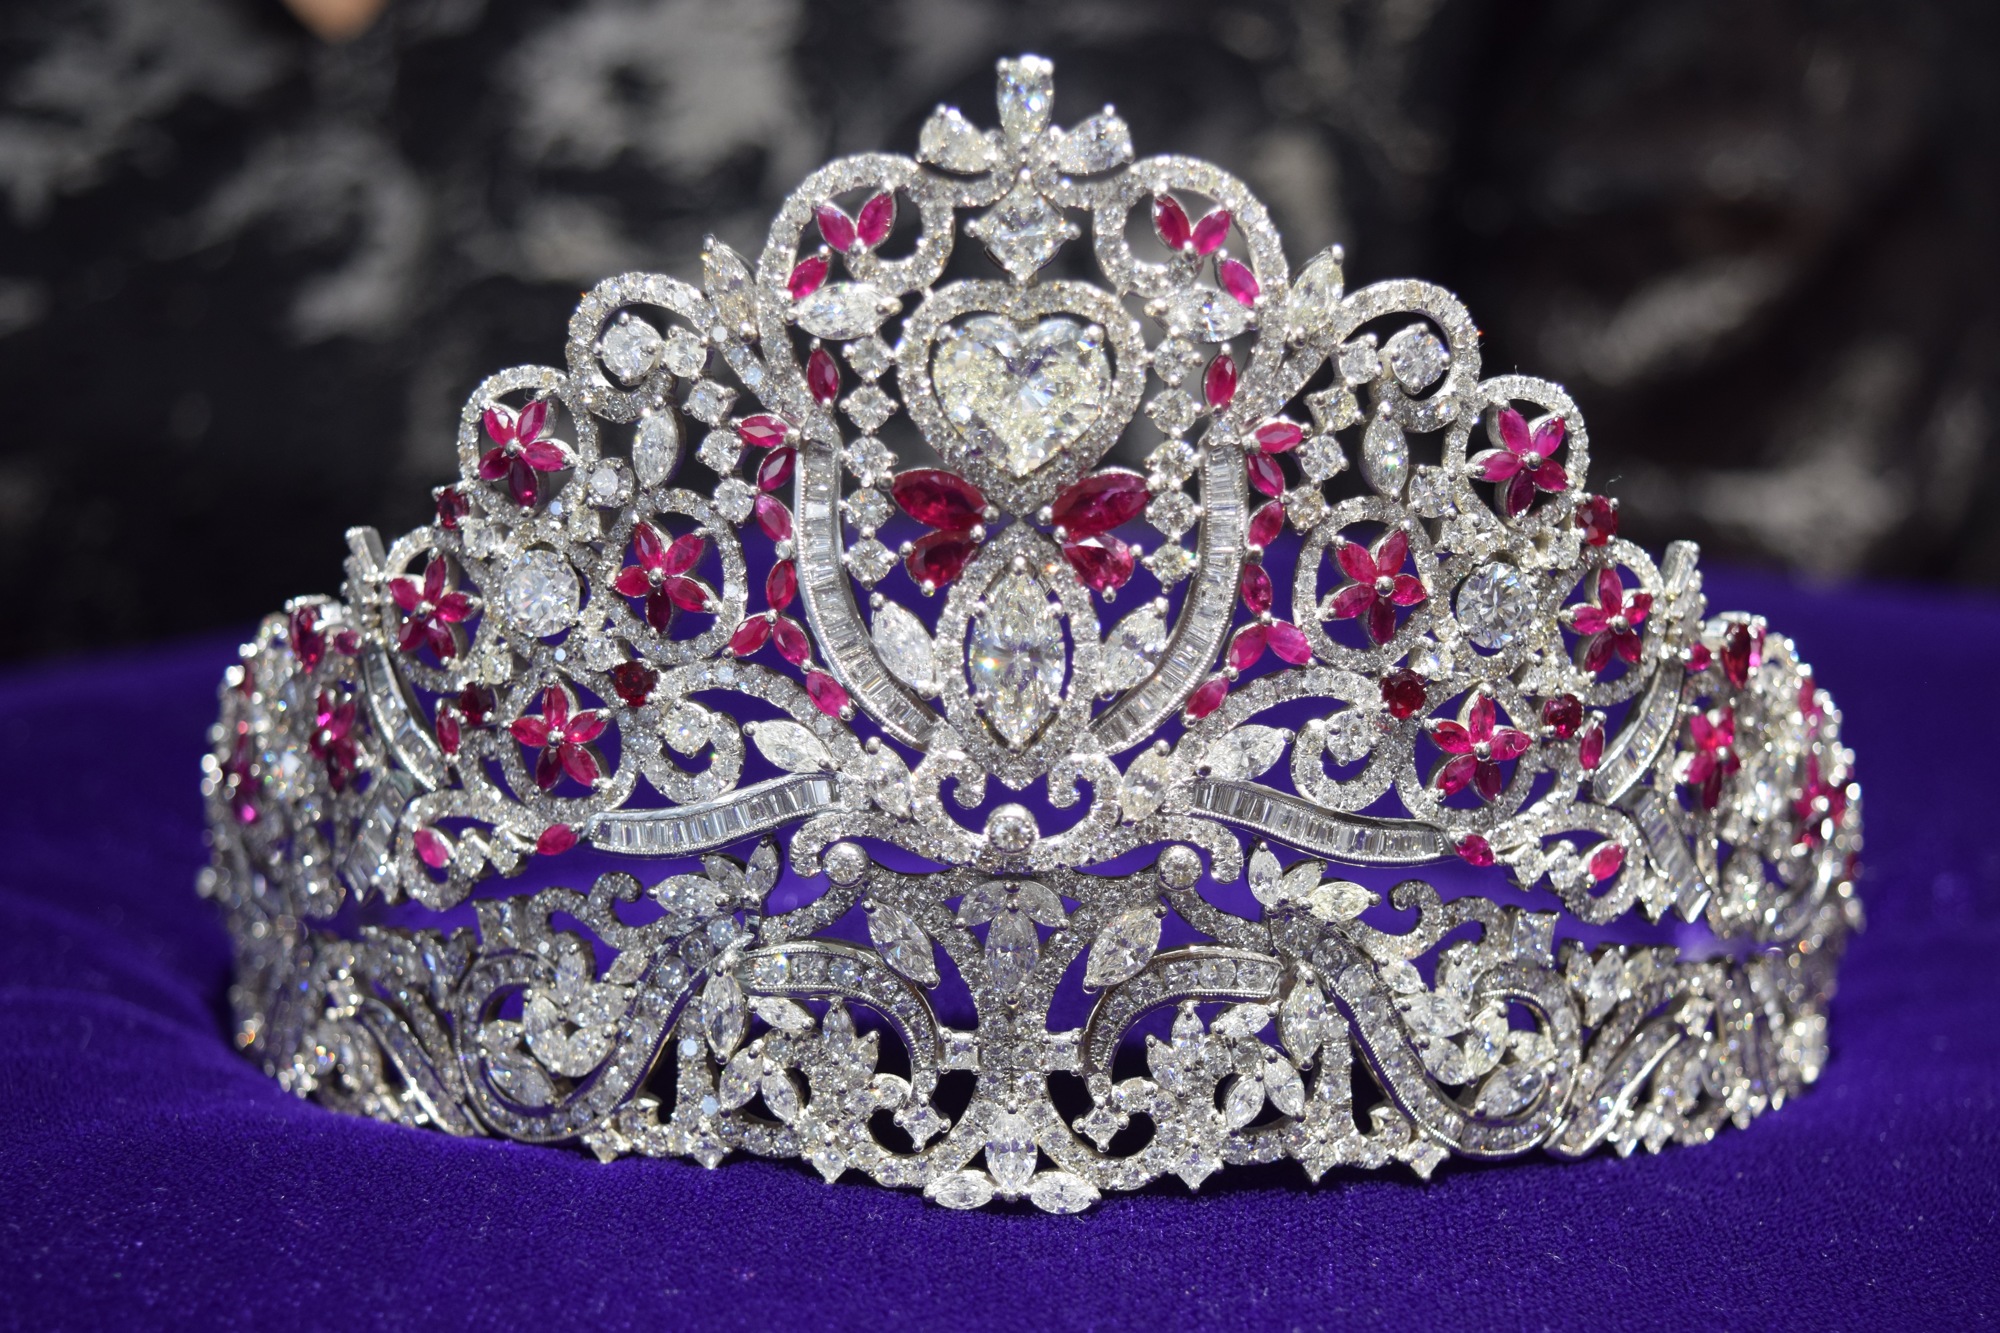 The Hope Tiara, worth $200,000, is made from genuine gold, diamonds and rubies.